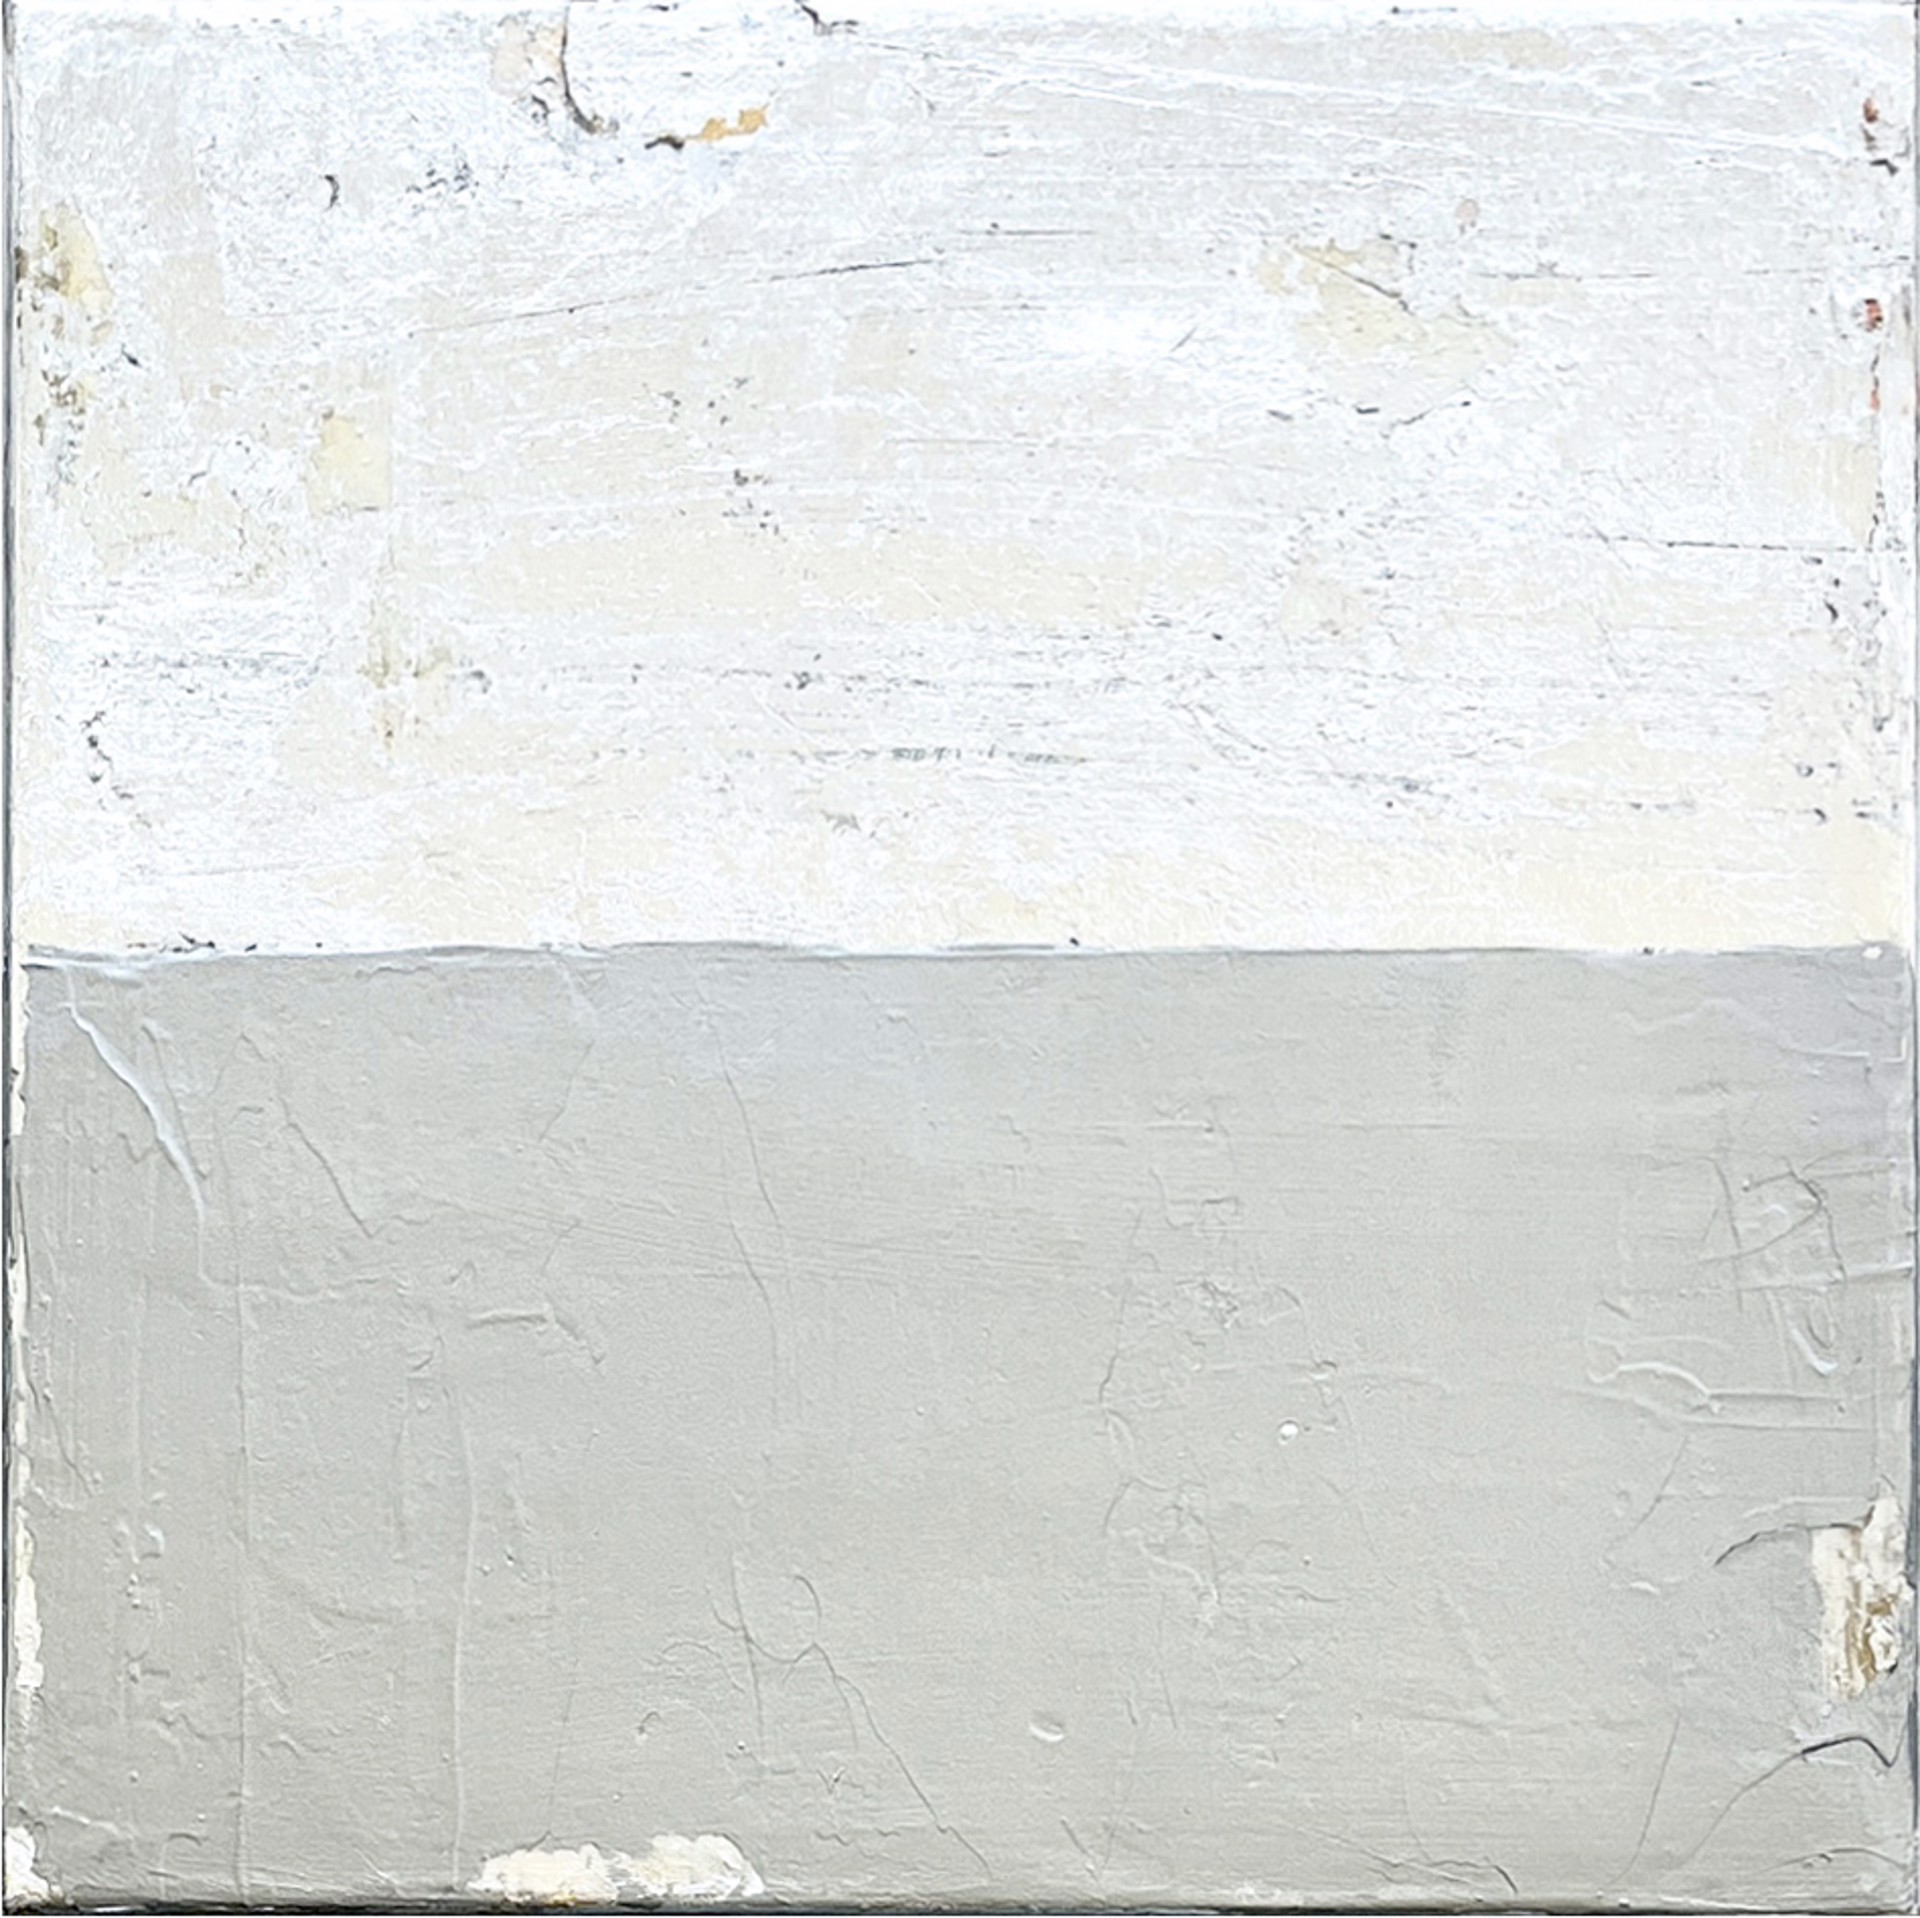 Silver and Silver (SS051) is 1 of 4 silver leaf mixed media panels from Japanese painter and artist Takefumi Hori.